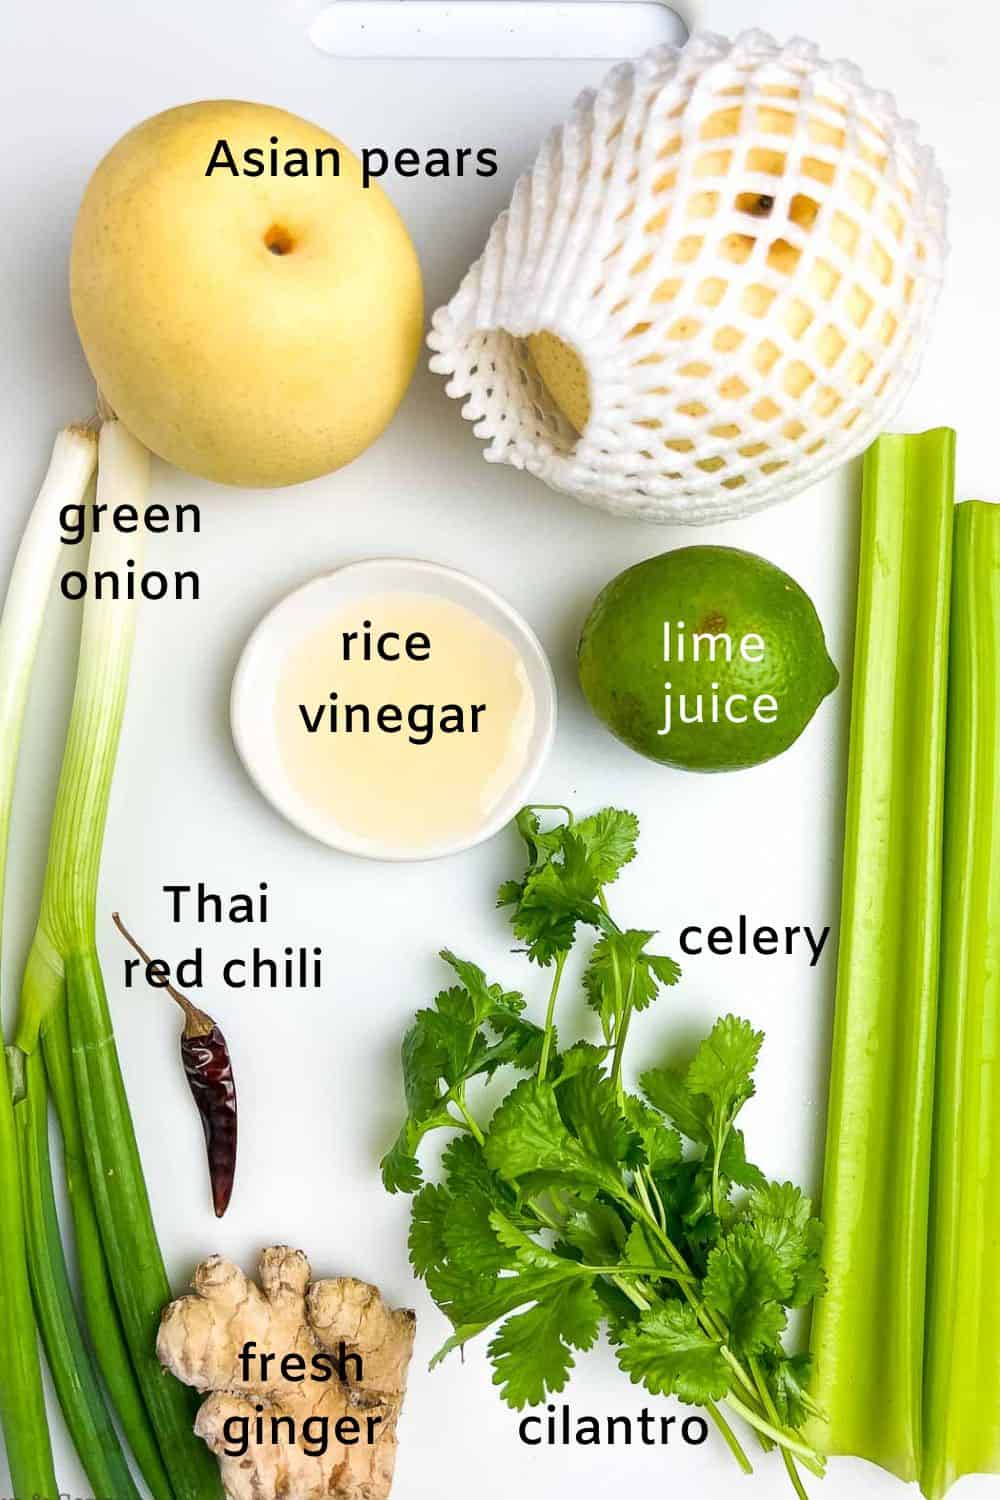 Labelled ingredients for Asian Pear Slaw with Ginger and Lime.